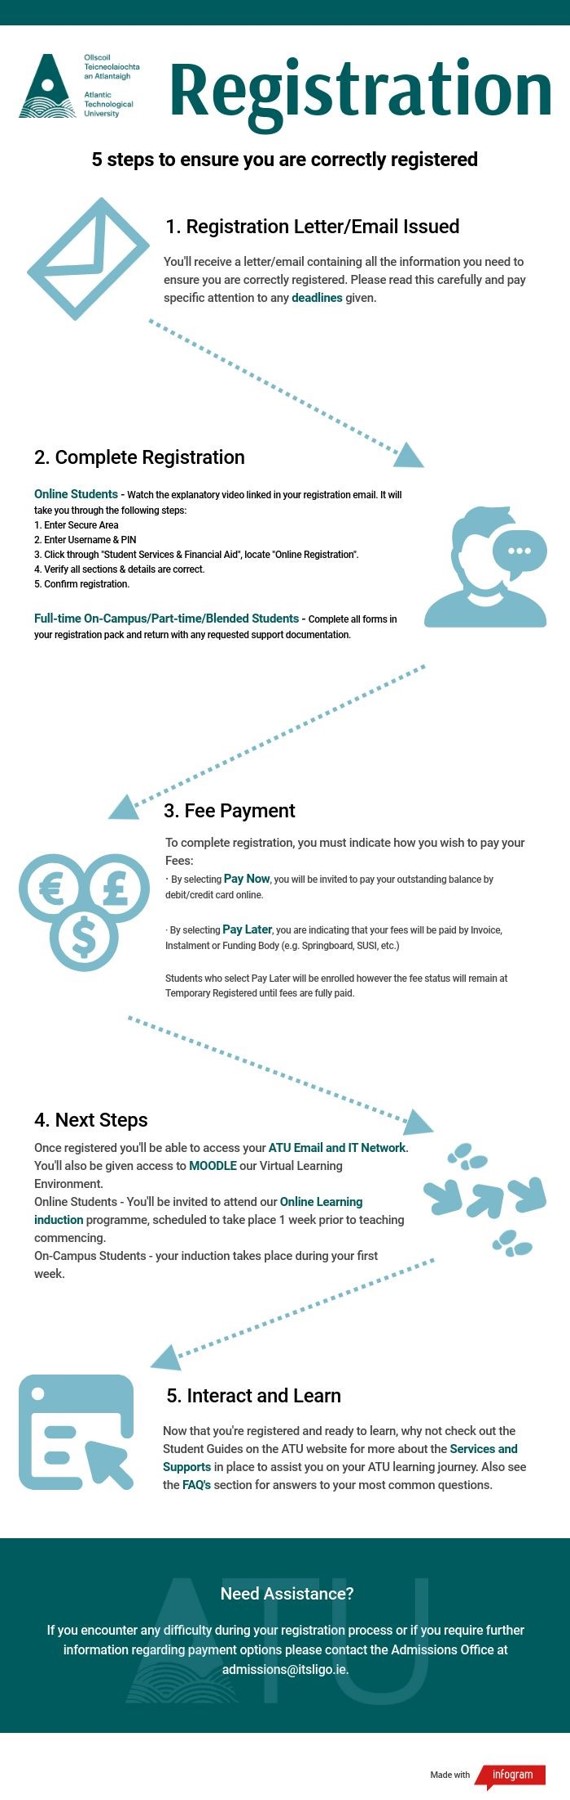 A graphic outlining registration steps